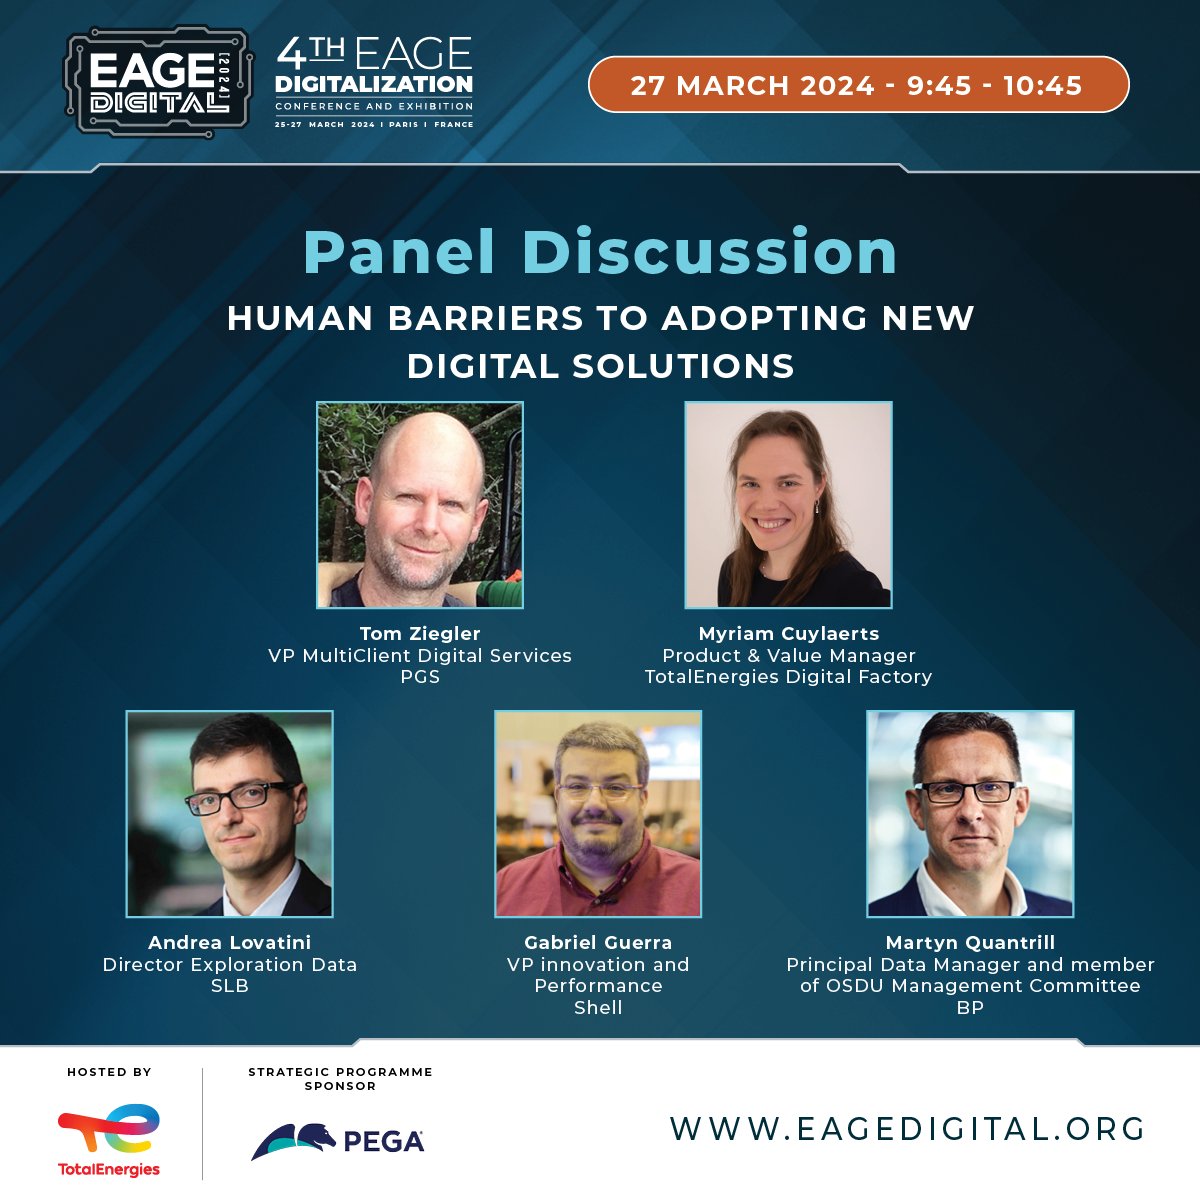 Join 'Human Barriers to Digital Solutions' panel with experts from PGS, TotalEnergies, SLB, Shell, and BP. Tackle leadership, talent, culture, and job security in digital adoption. Register at eageget.org. #EAGEDIGITAL2024